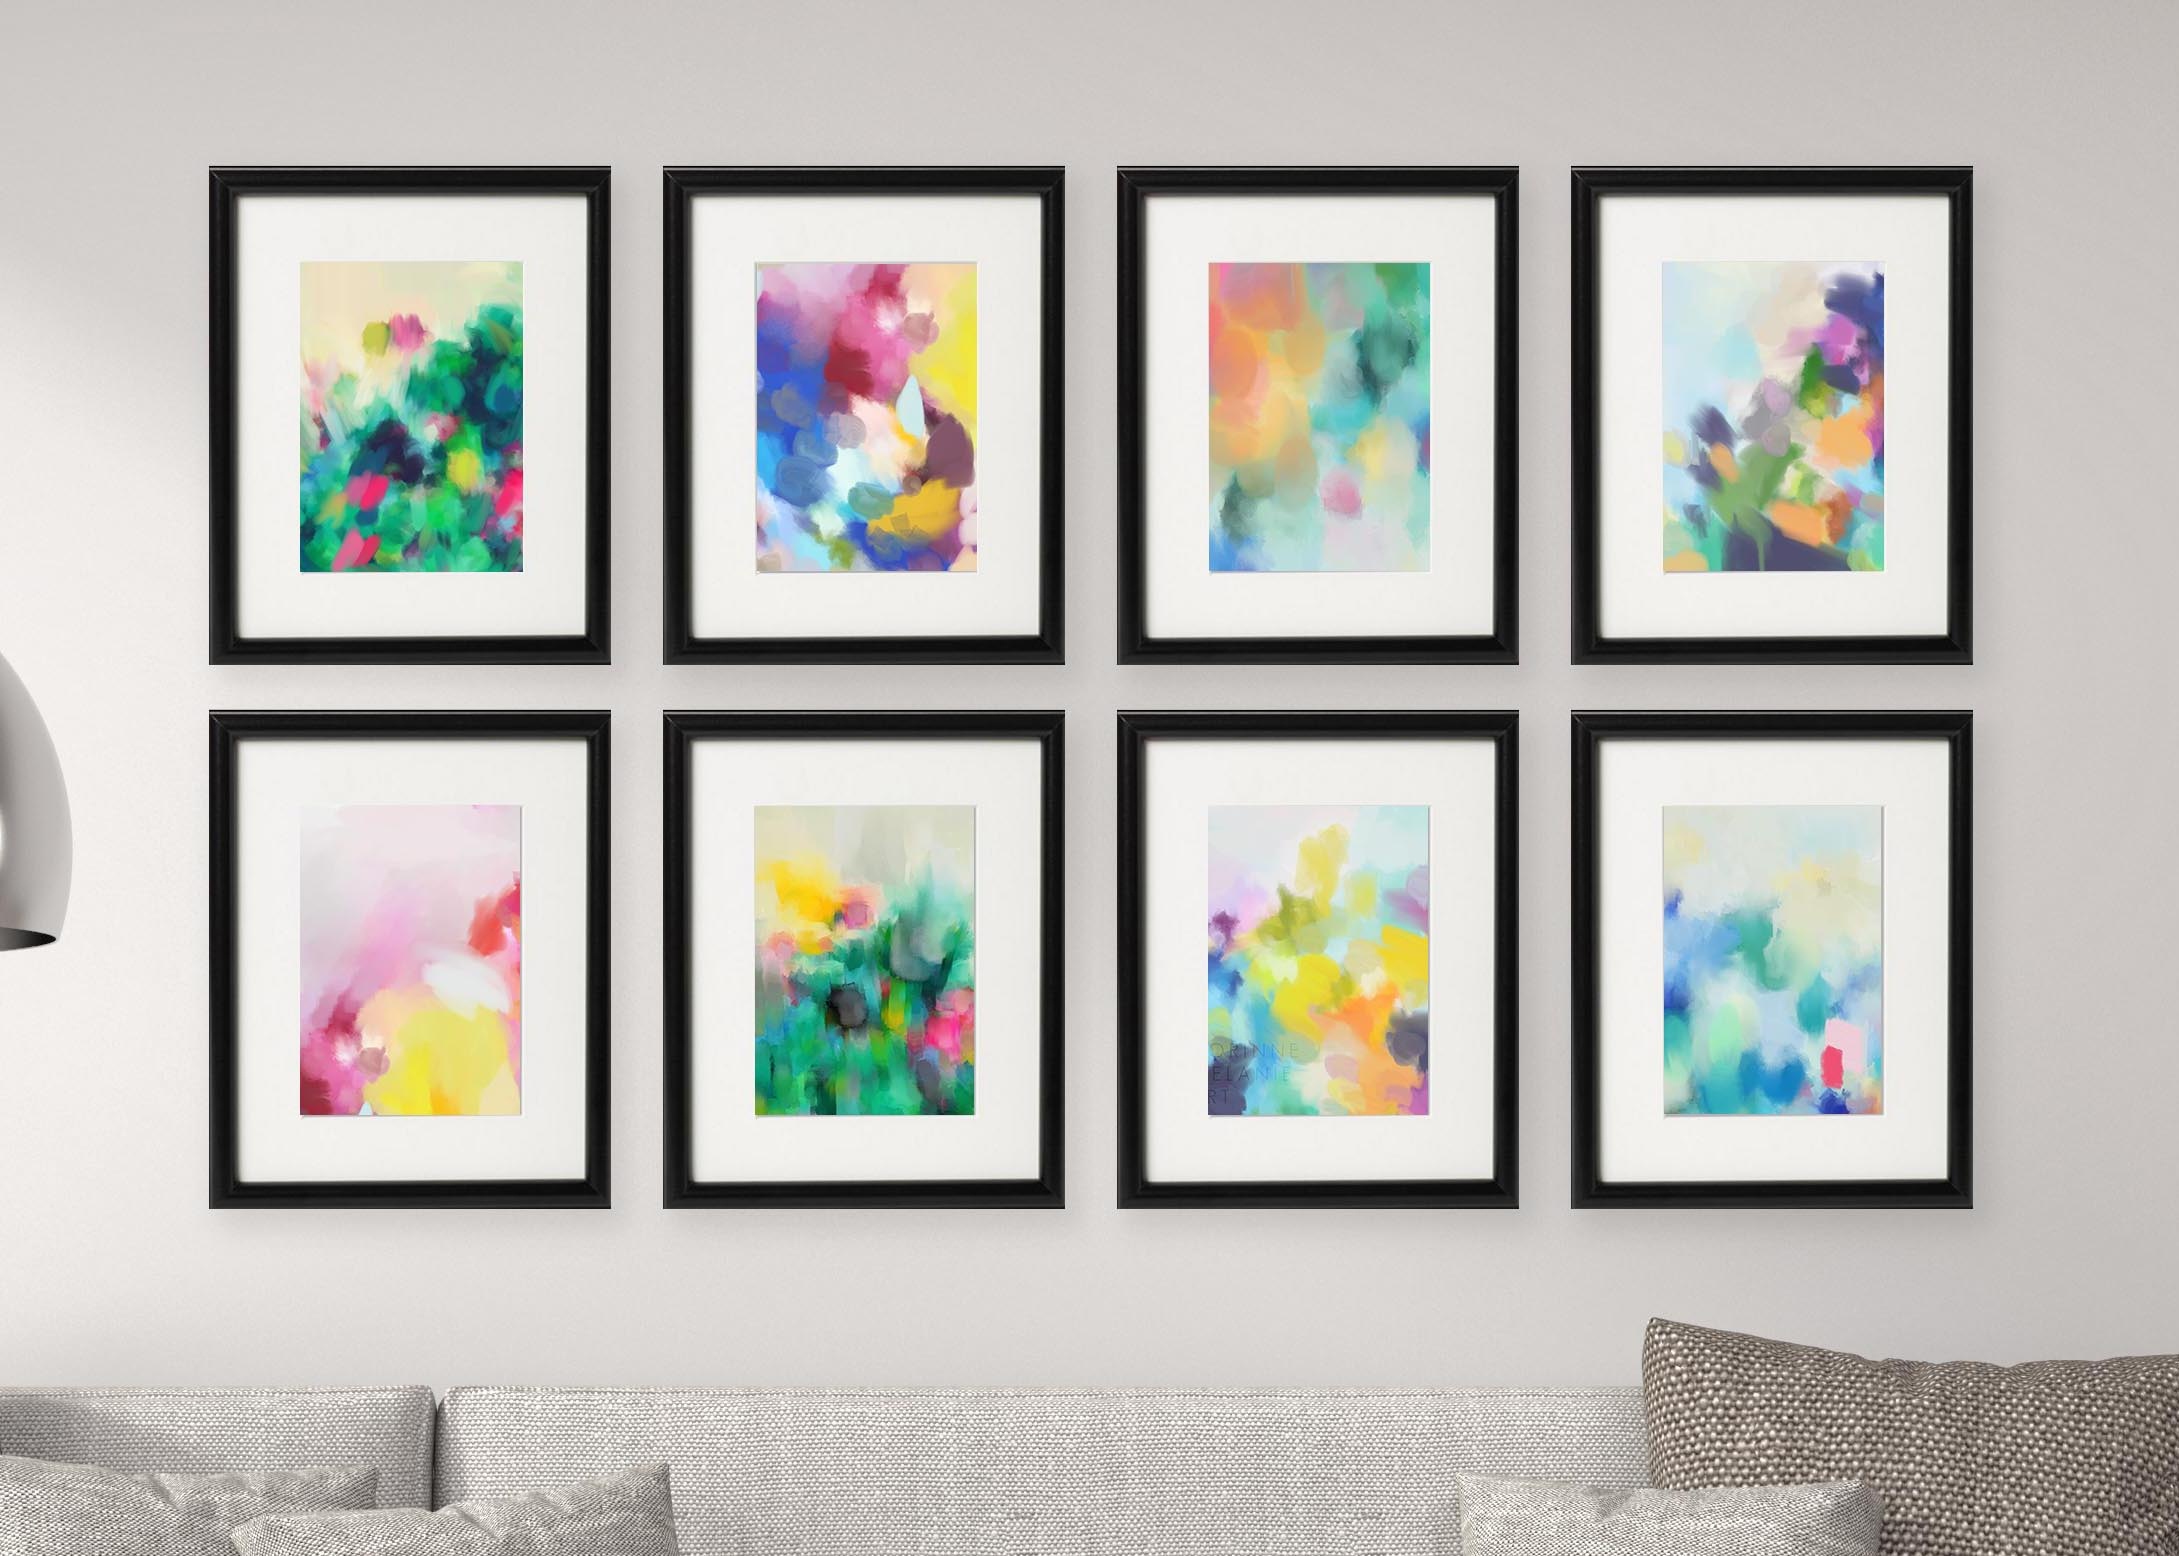 Gallery Wall Free Printables: Download All 8 Colourful, Abstract Art - Free Printable Artwork To Frame